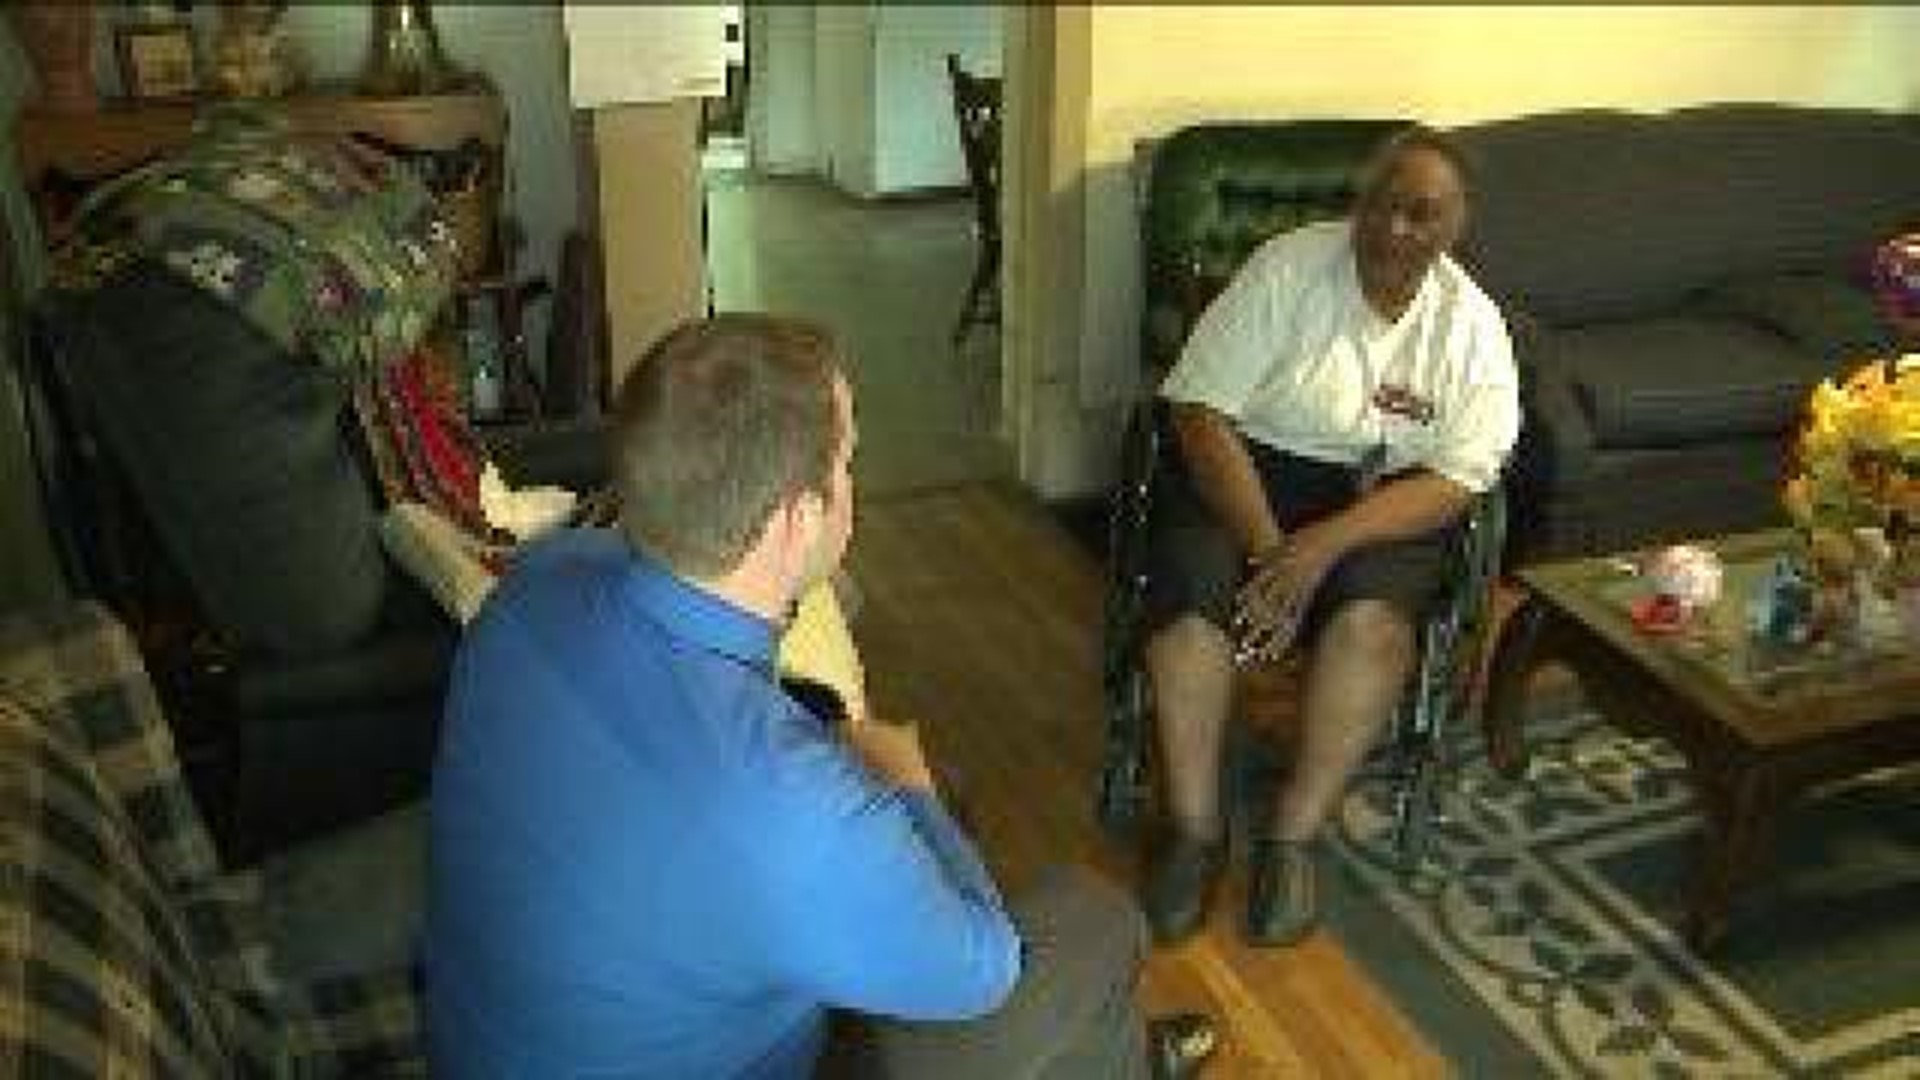 “Lord, I was so Scared”, Another Elderly Woman is Targeted During Home Invasion